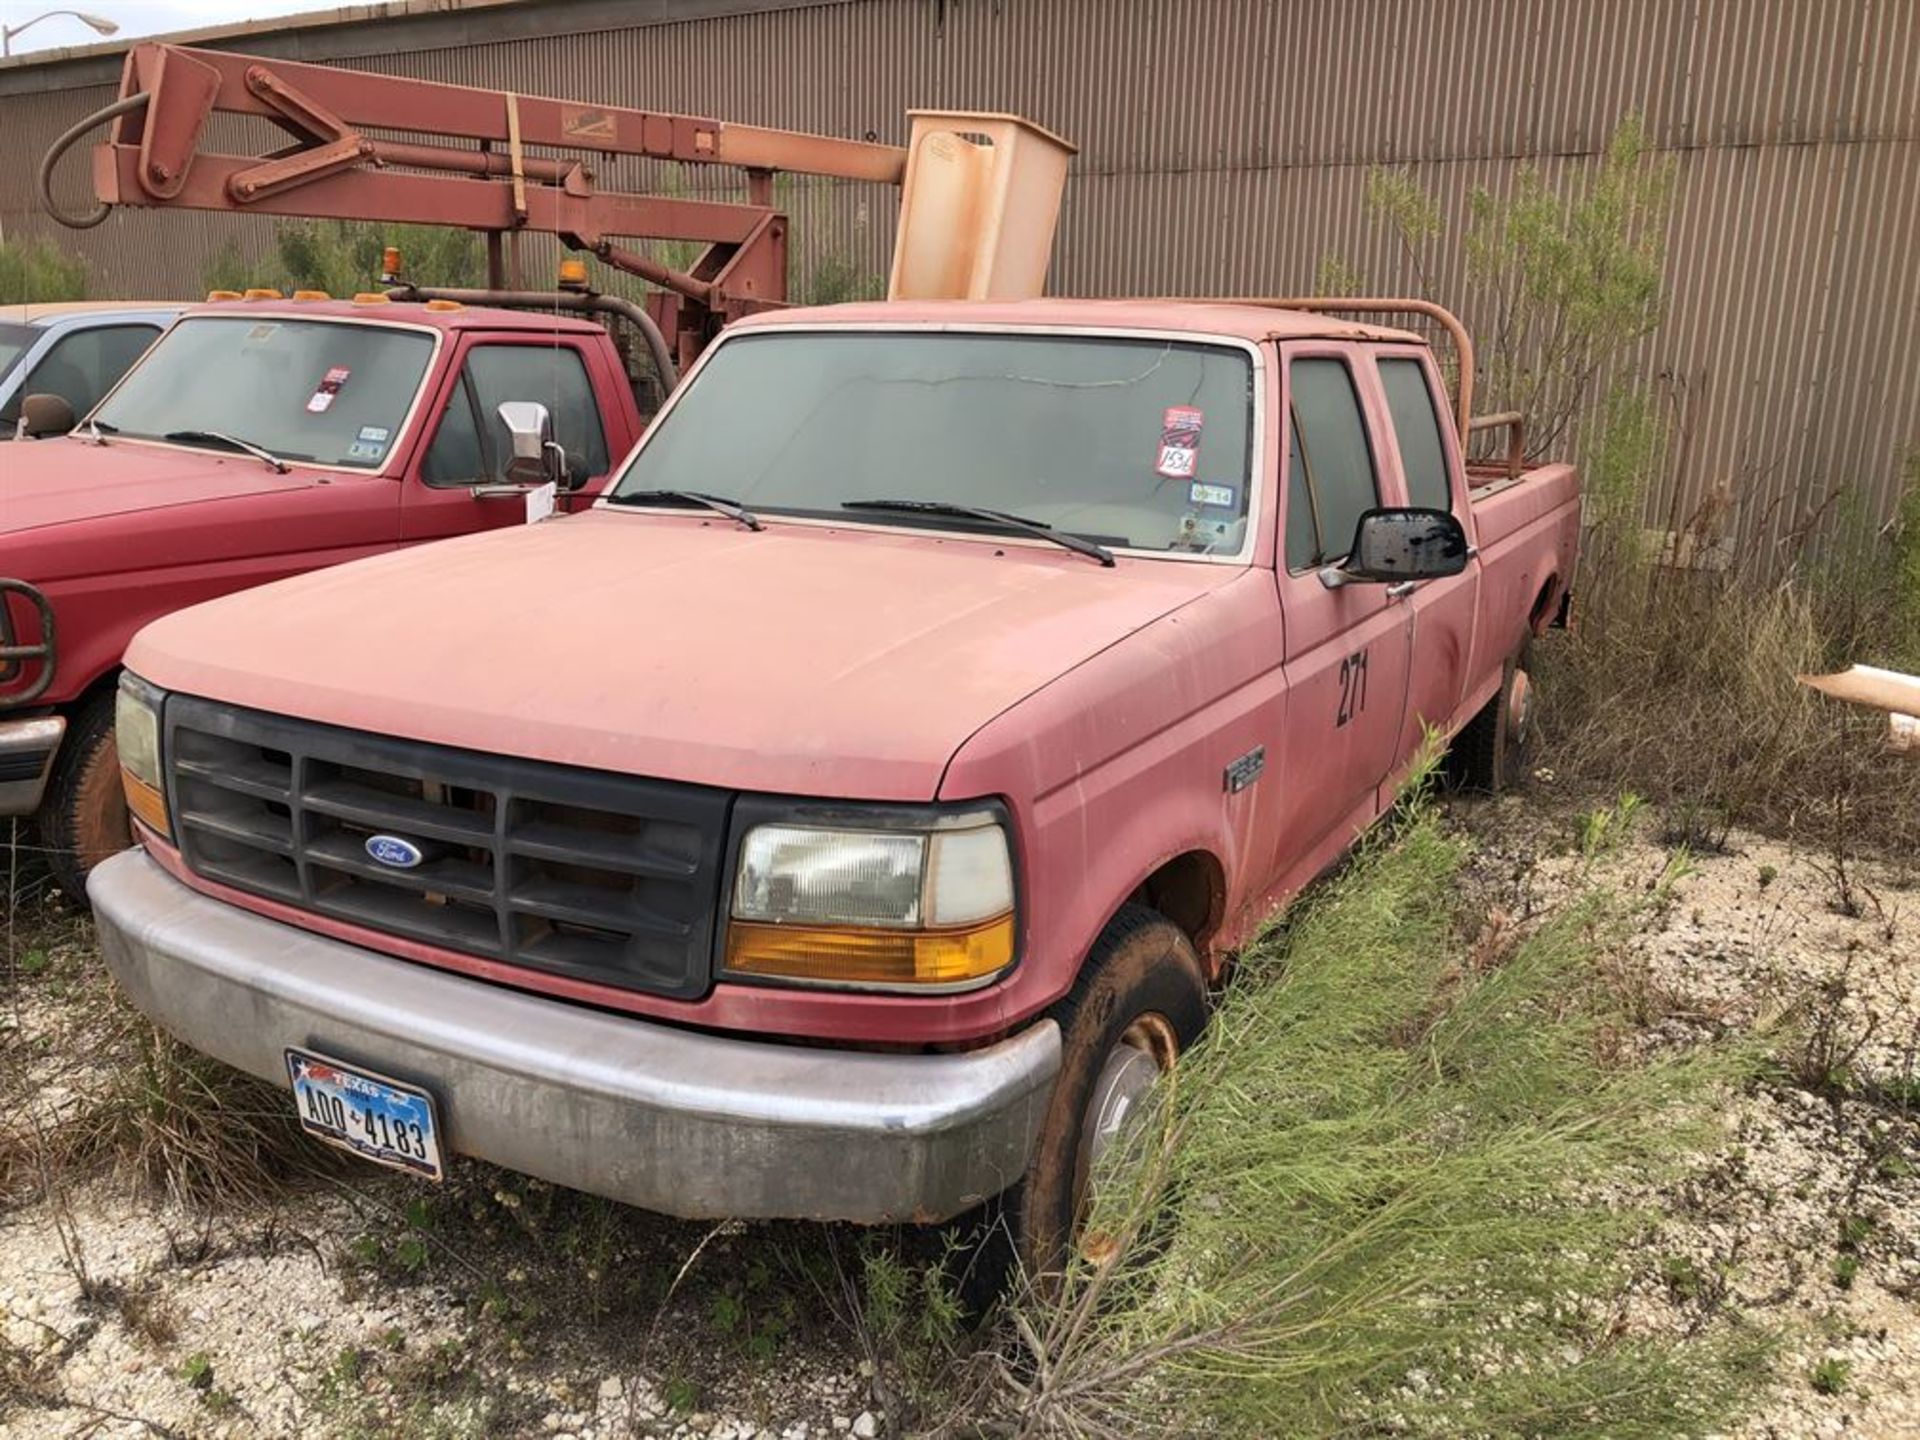 1994 Ford F-350 4-Door Extended Cab Pickup Truck, VIN 1FTJW35H3REA50295, No Title (Not Running) (